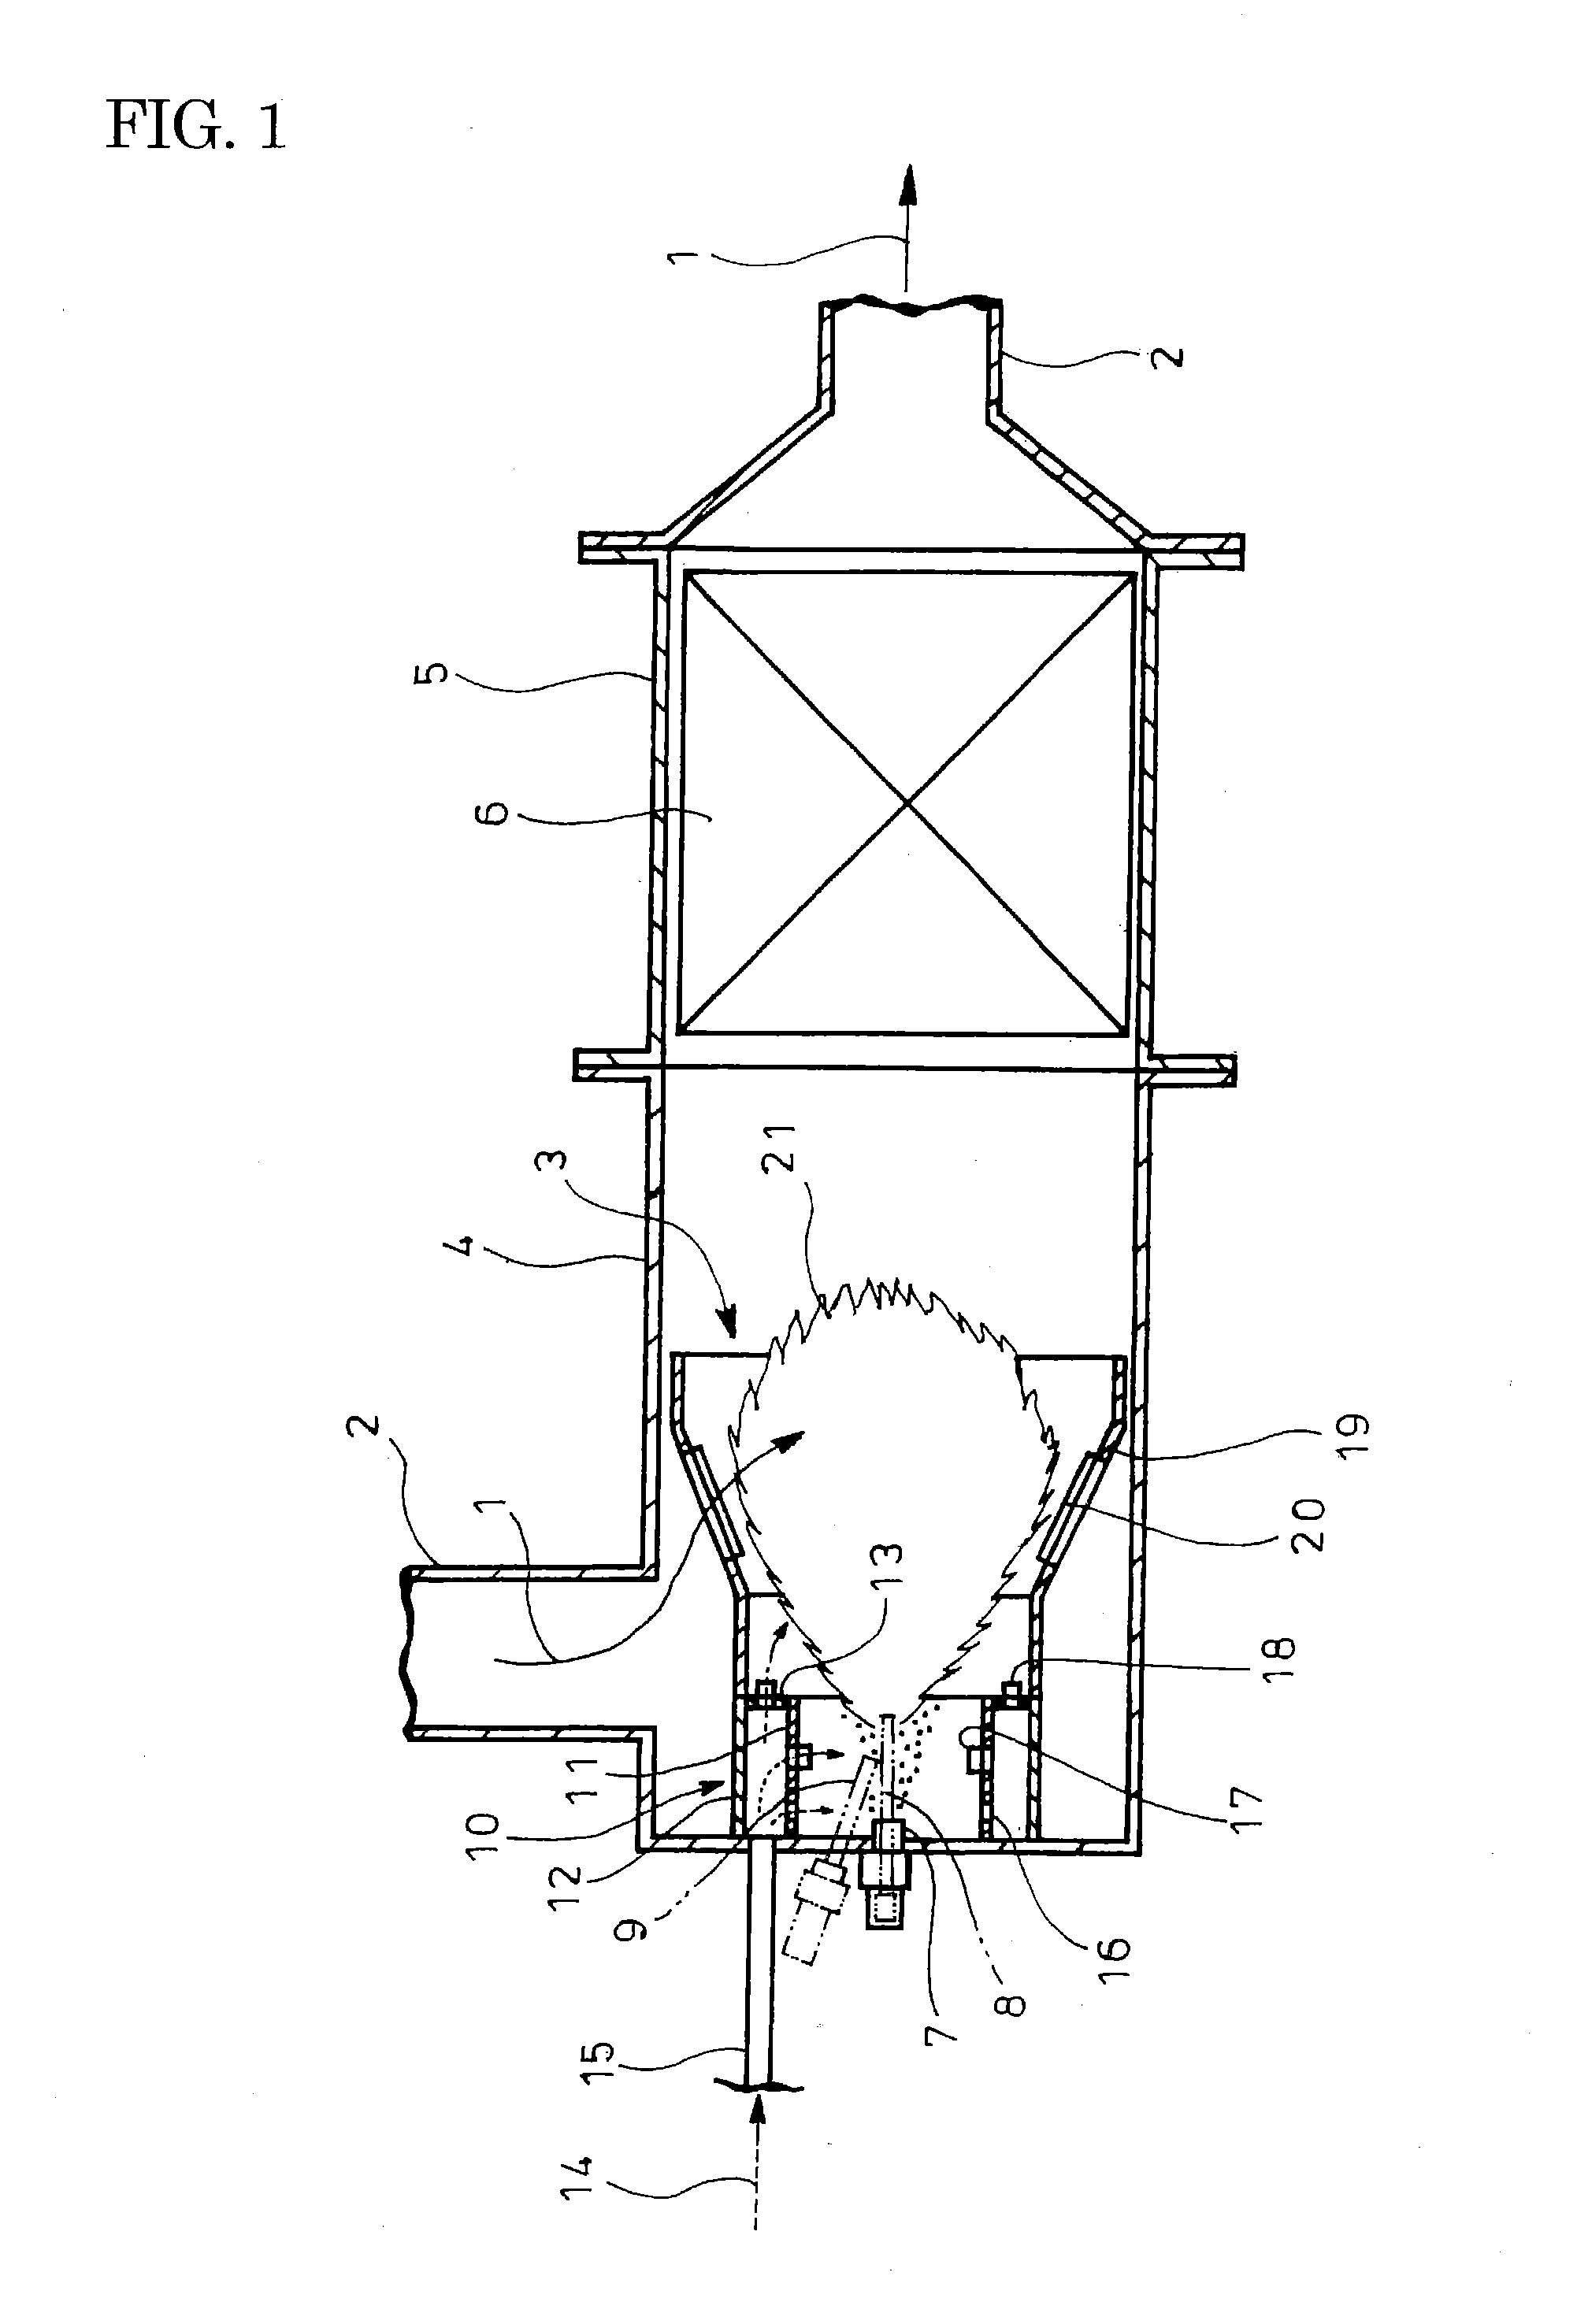 Combustion appliance for raising the temperature of exhaust gas